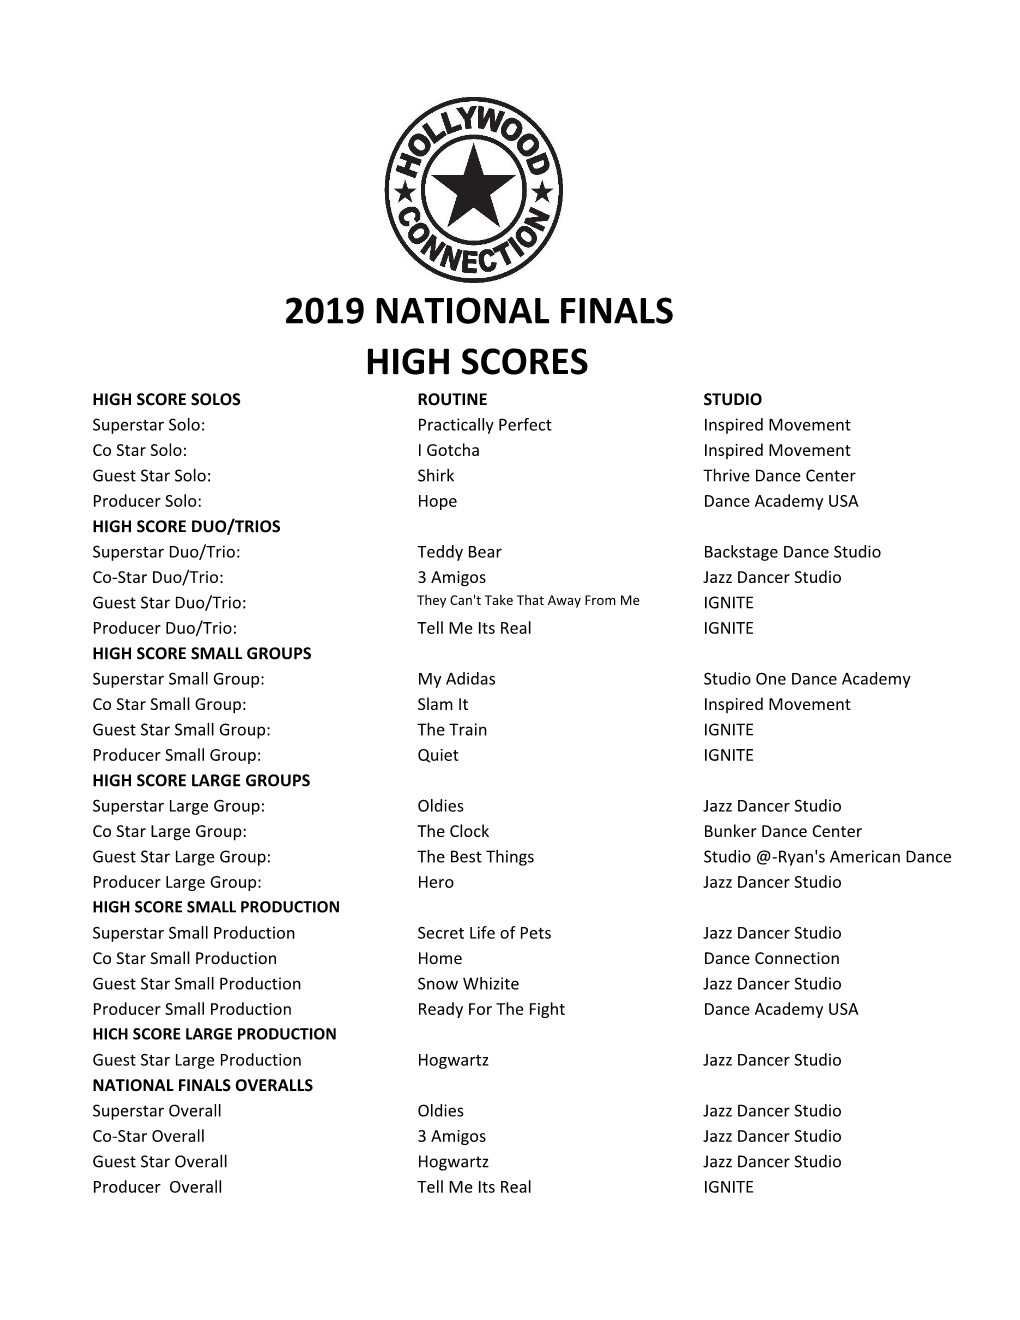 2019 Results / Awards